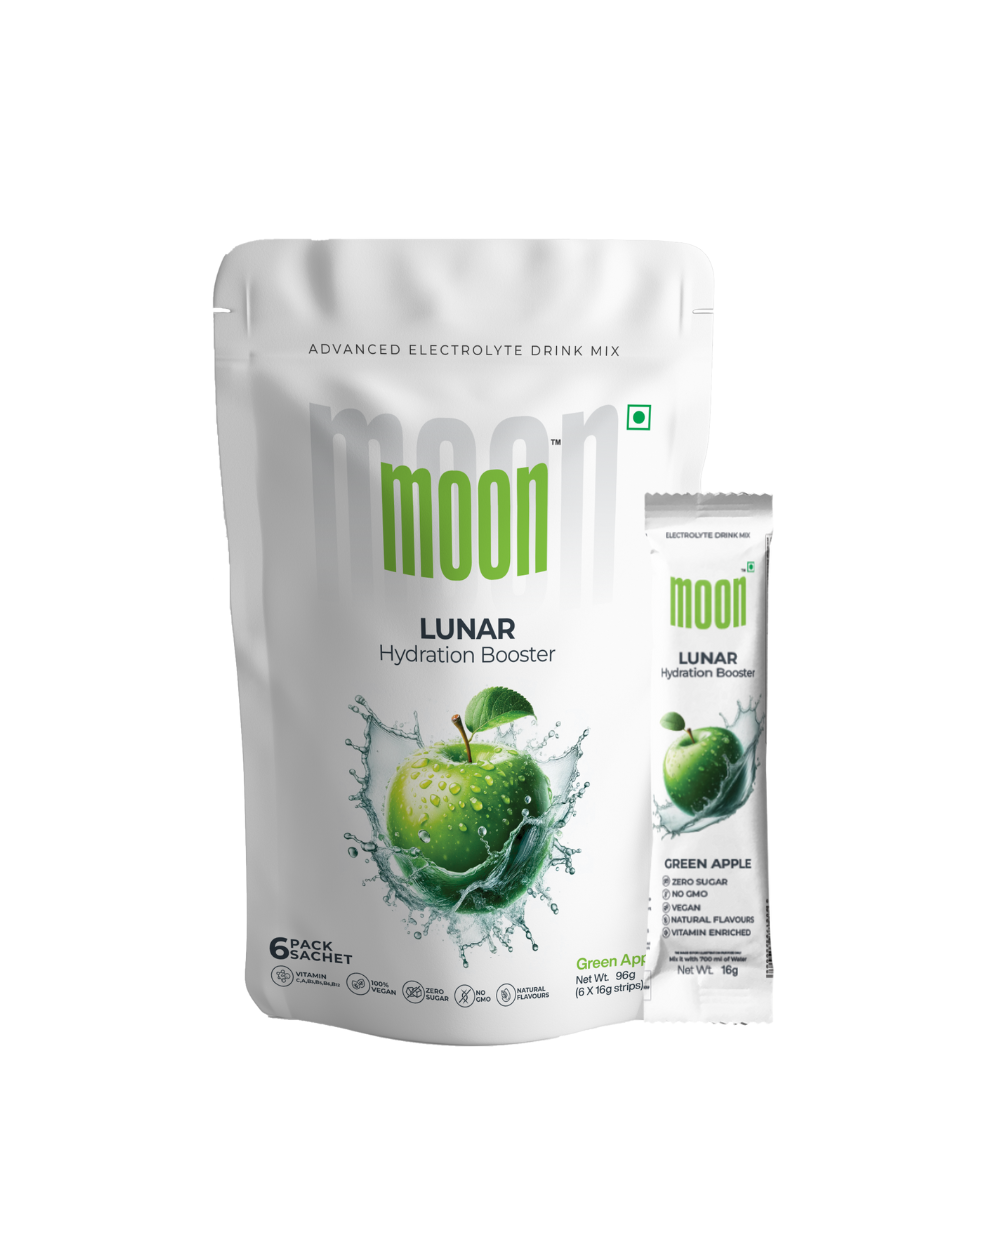 A bag of Moon Green Apple Lunar Hydration Booster juice with a pouch next to it by MOONFREEZE FOODS PRIVATE LIMITED.